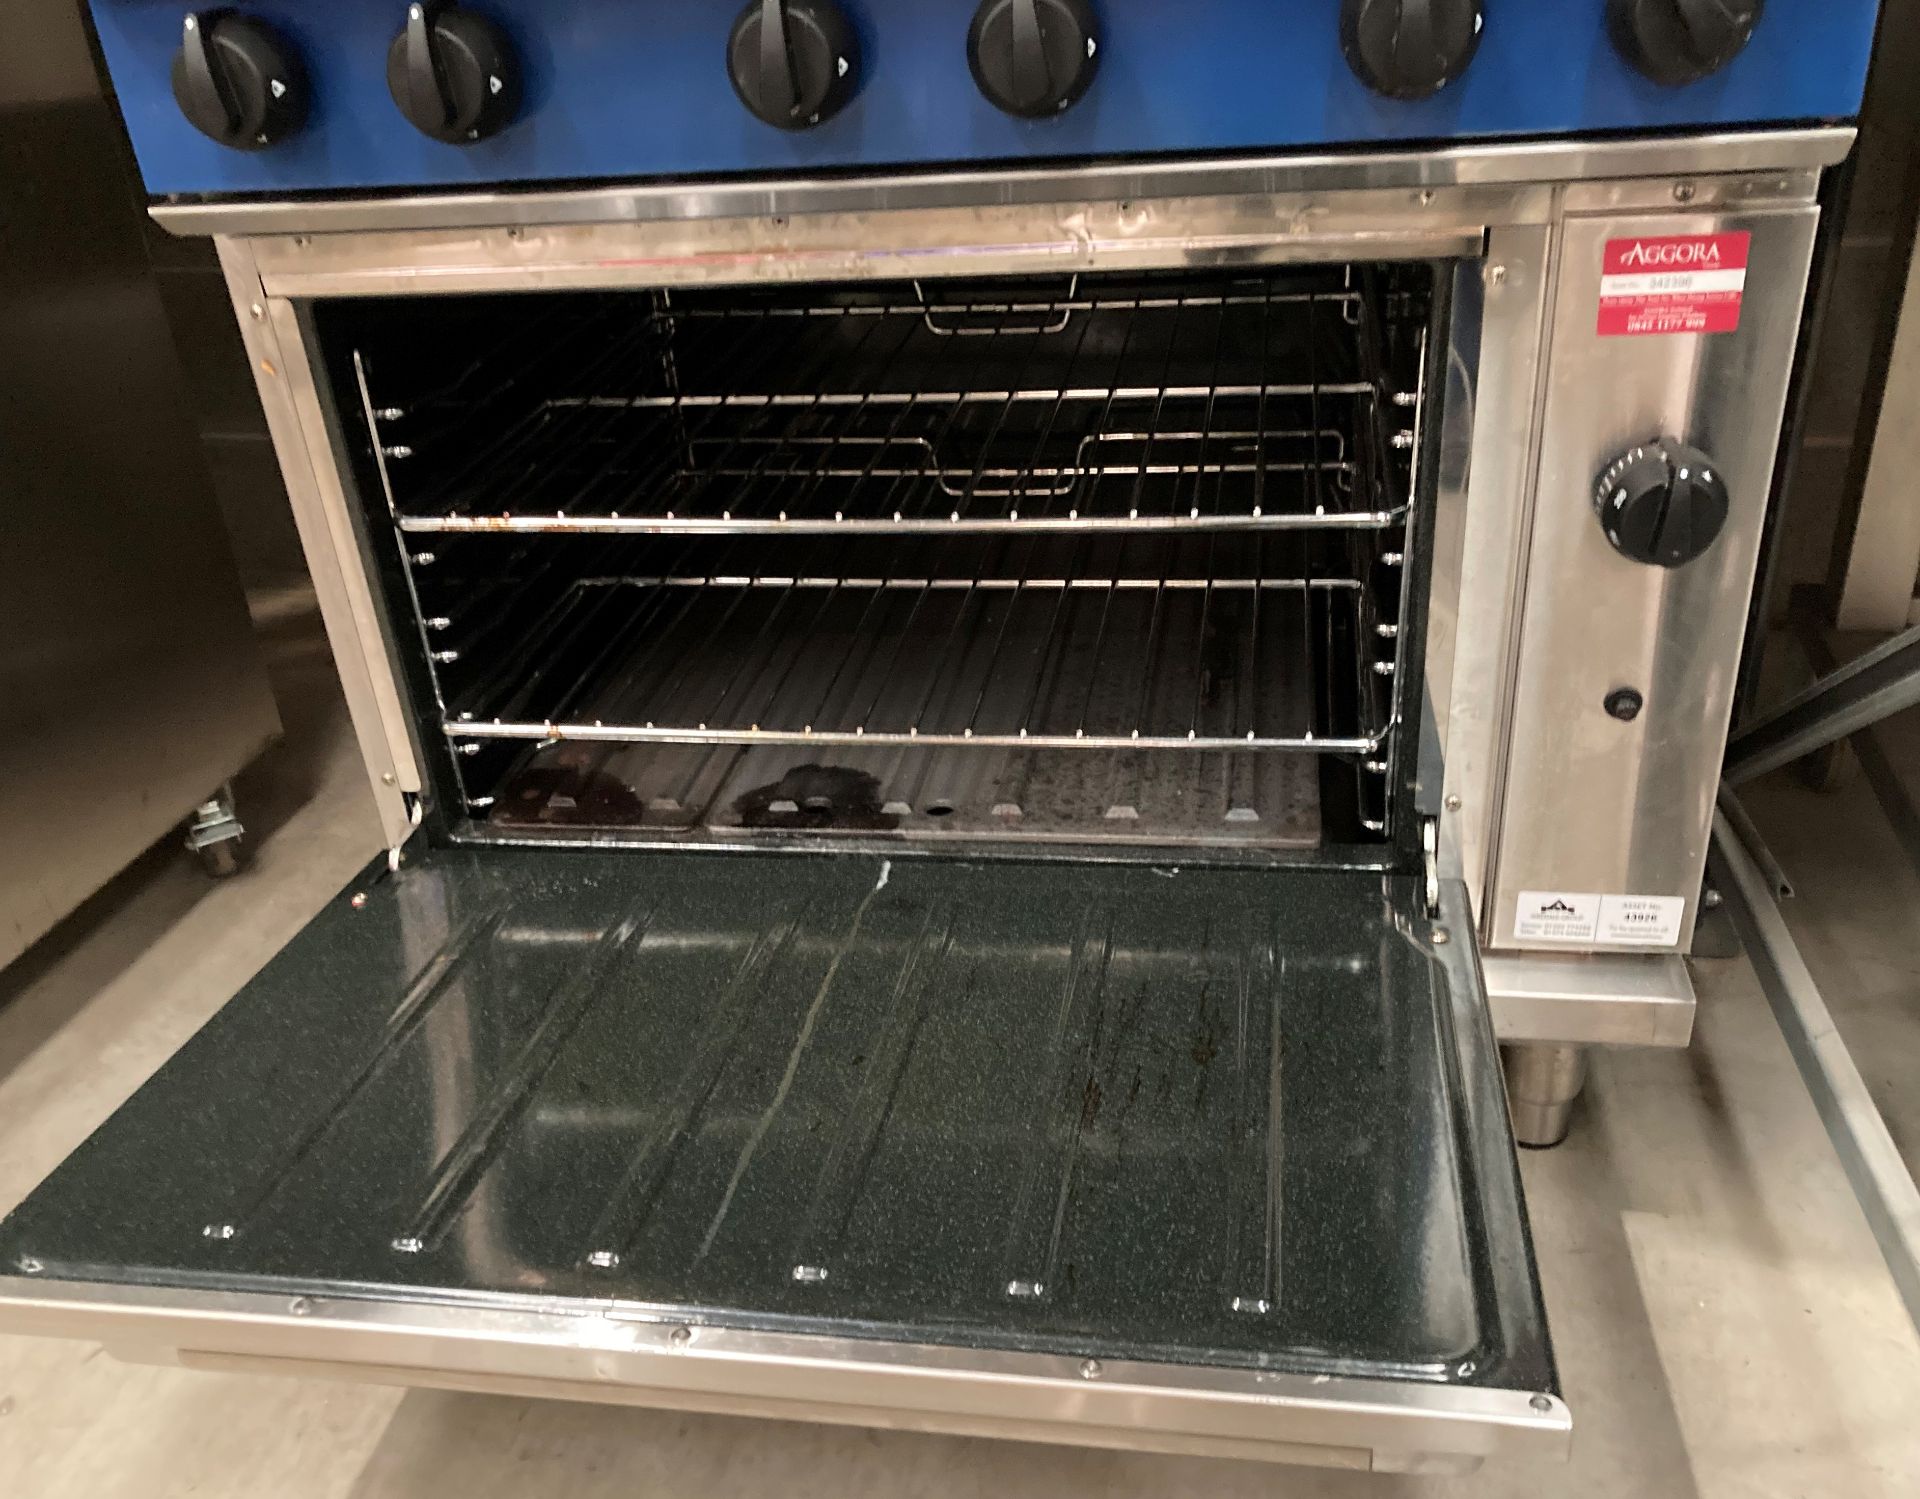 Blue Seal stainless steel commercial 6 burner cooker complete with blue seal commercial grill model - Image 2 of 3